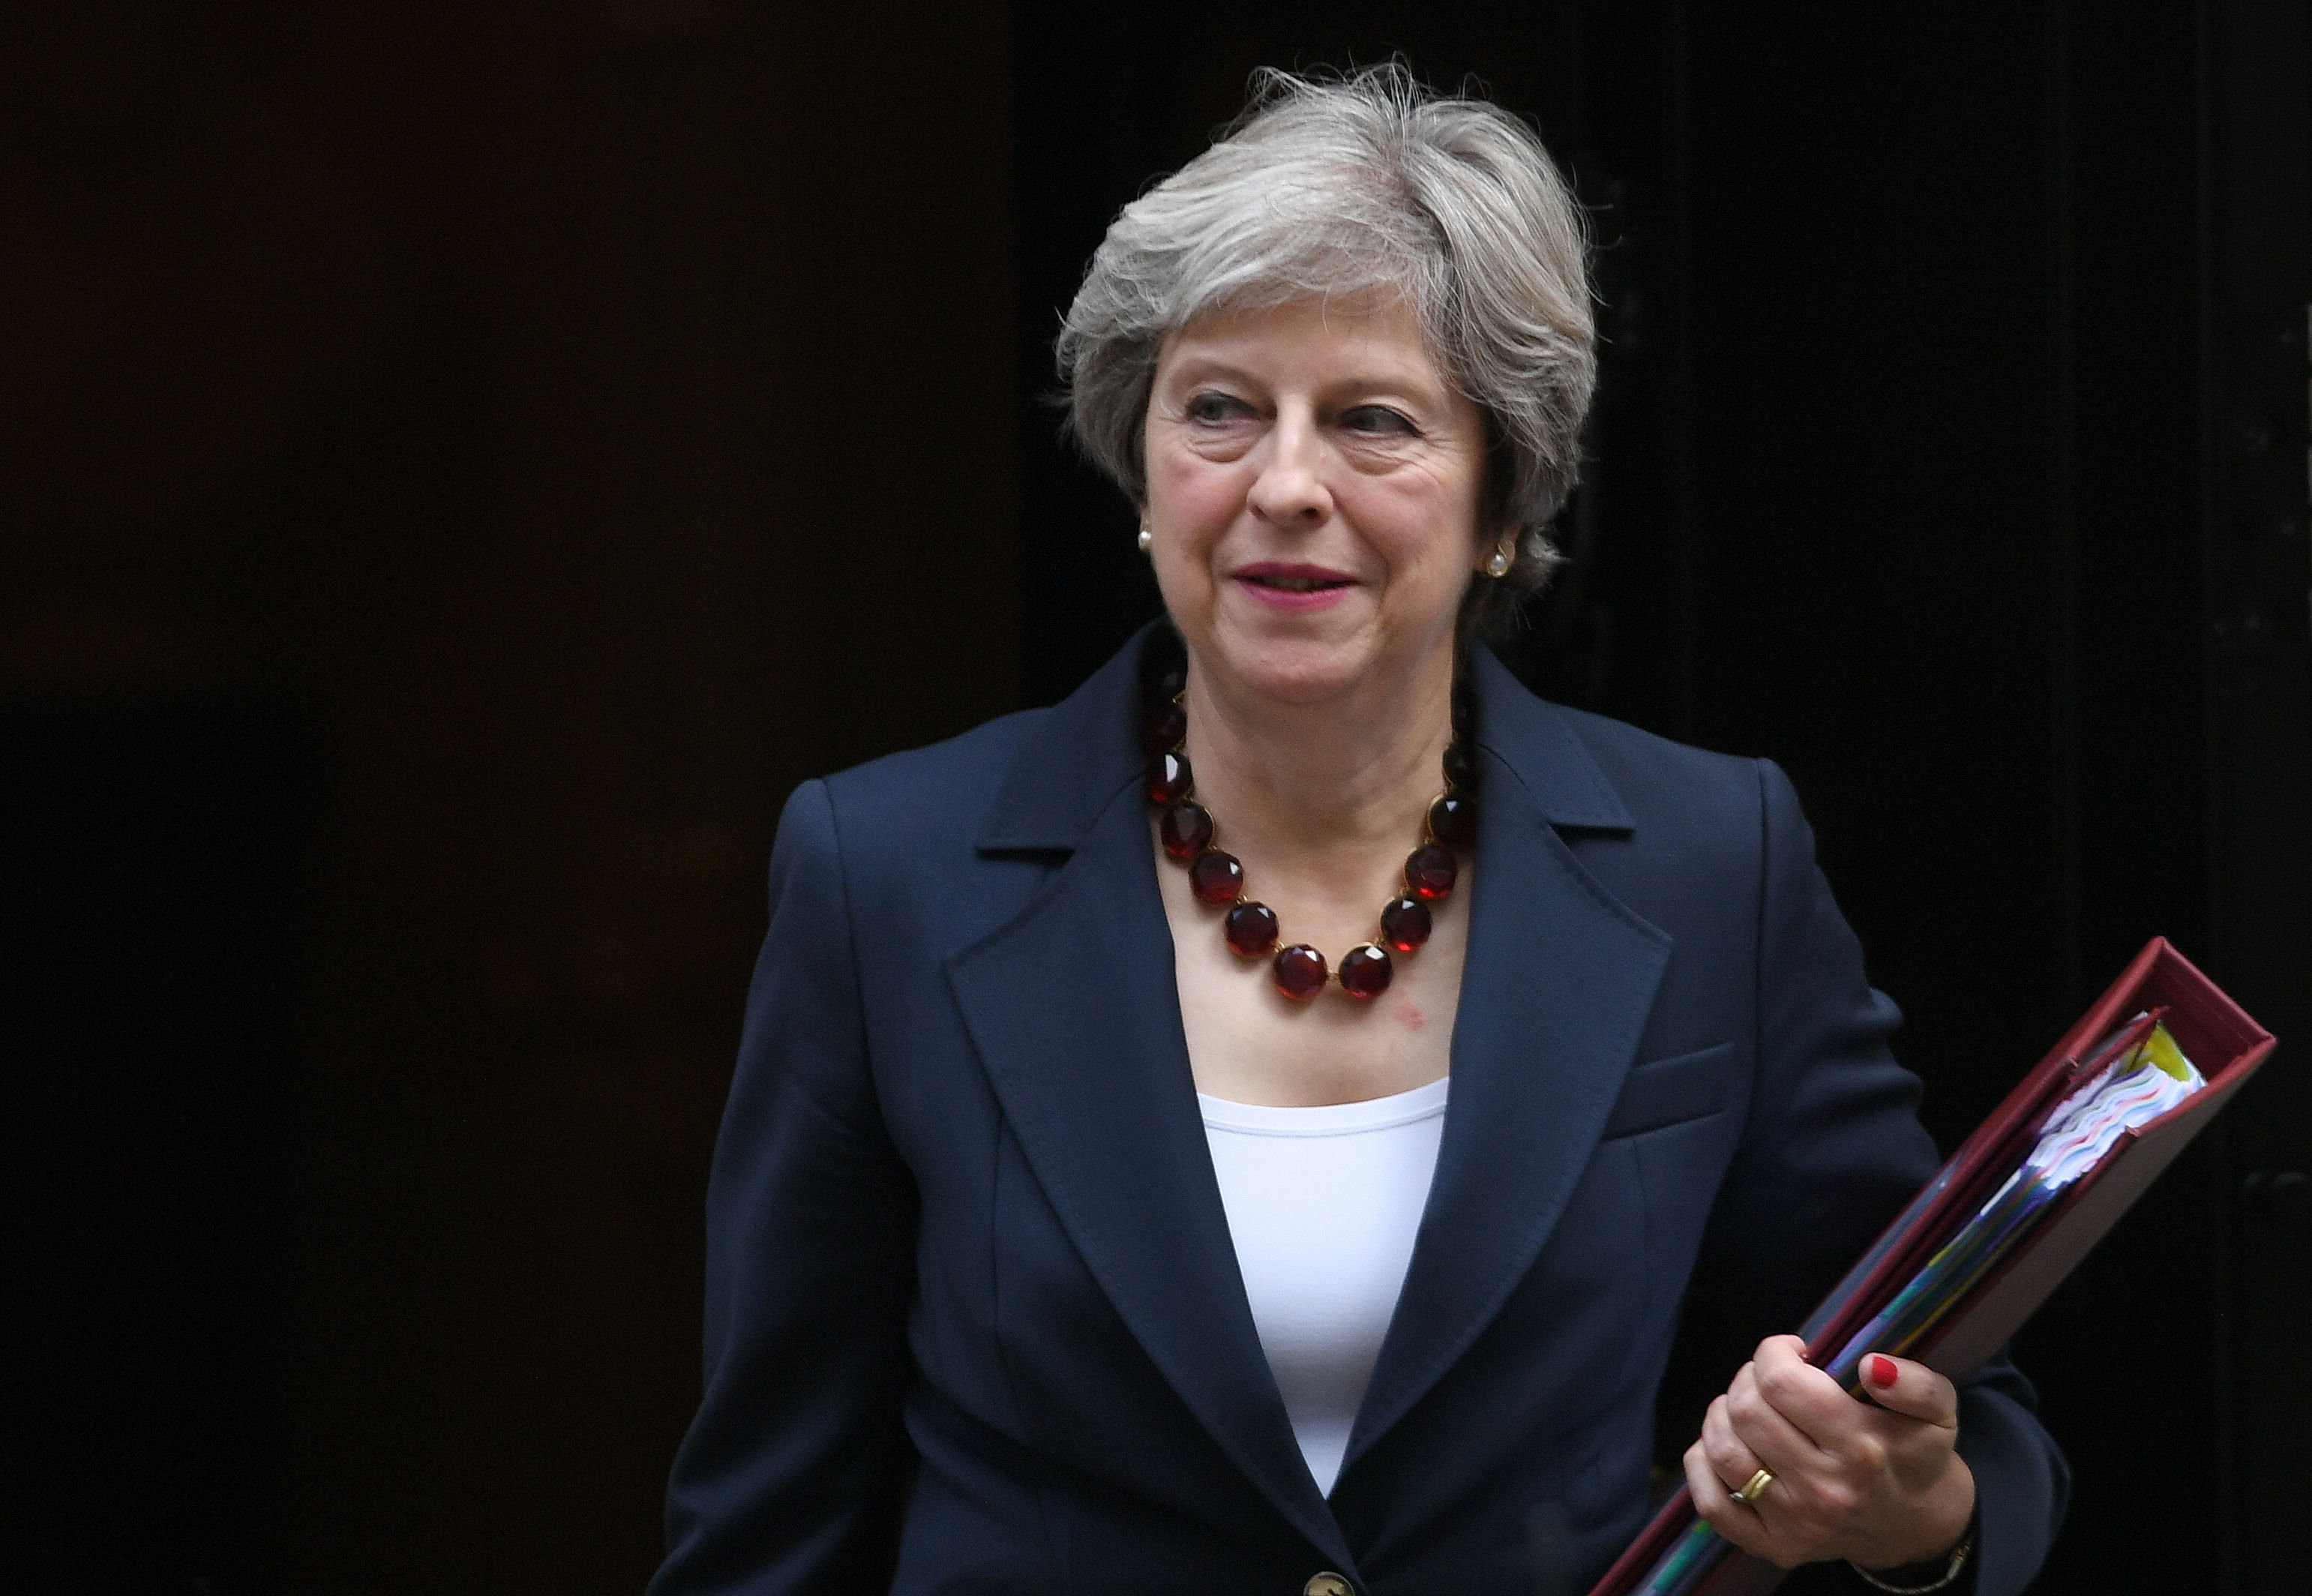 Theresa May has pledged to make mental health a priority.